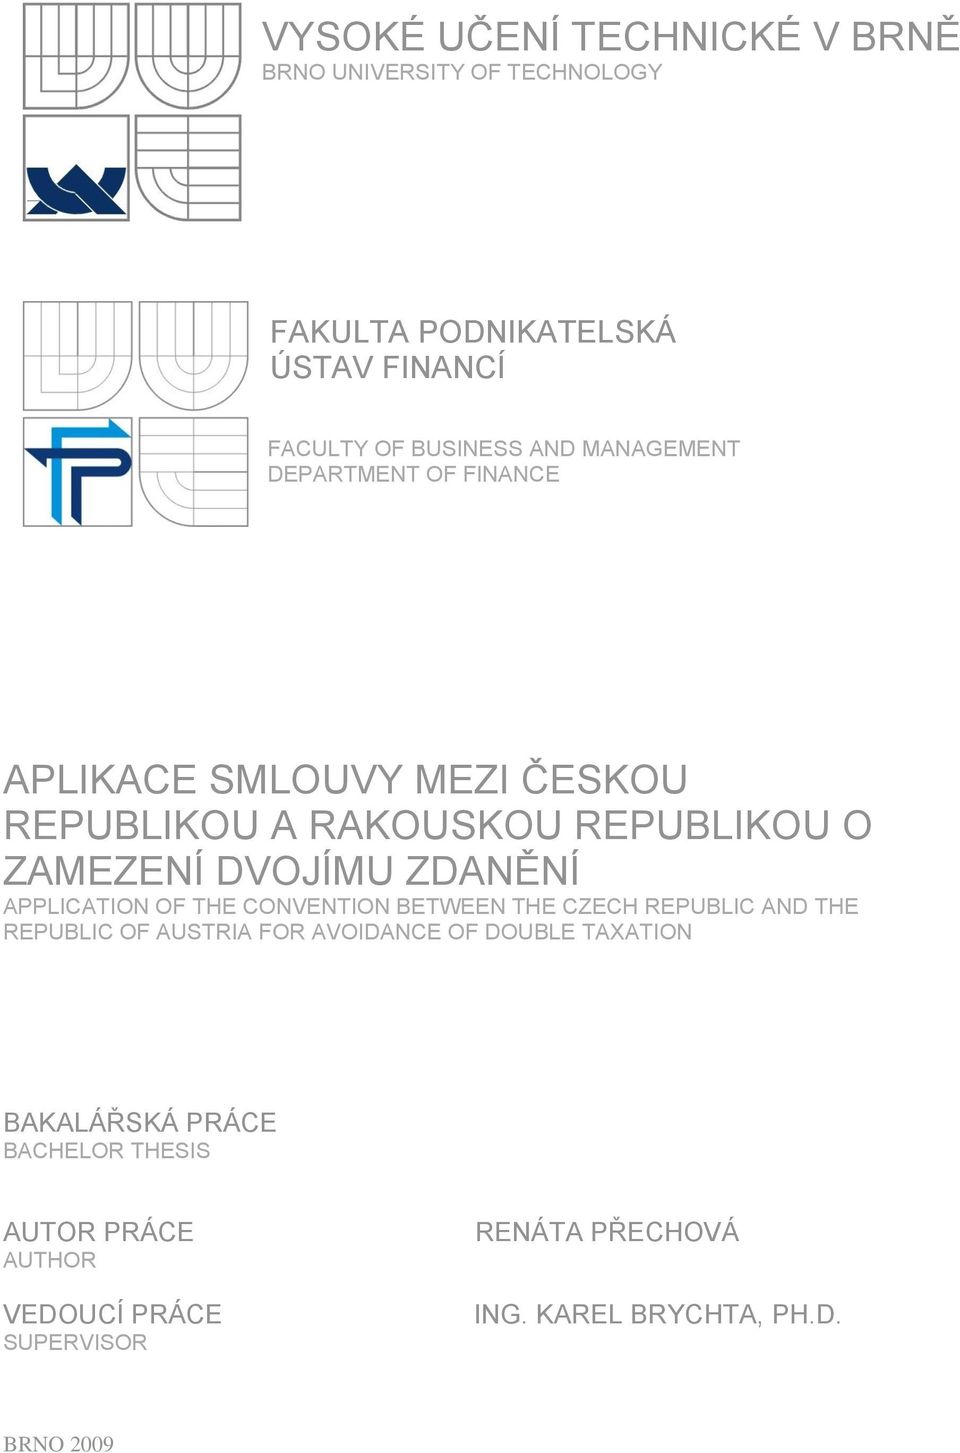 APPLICATION OF THE CONVENTION BETWEEN THE CZECH REPUBLIC AND THE REPUBLIC OF AUSTRIA FOR AVOIDANCE OF DOUBLE TAXATION